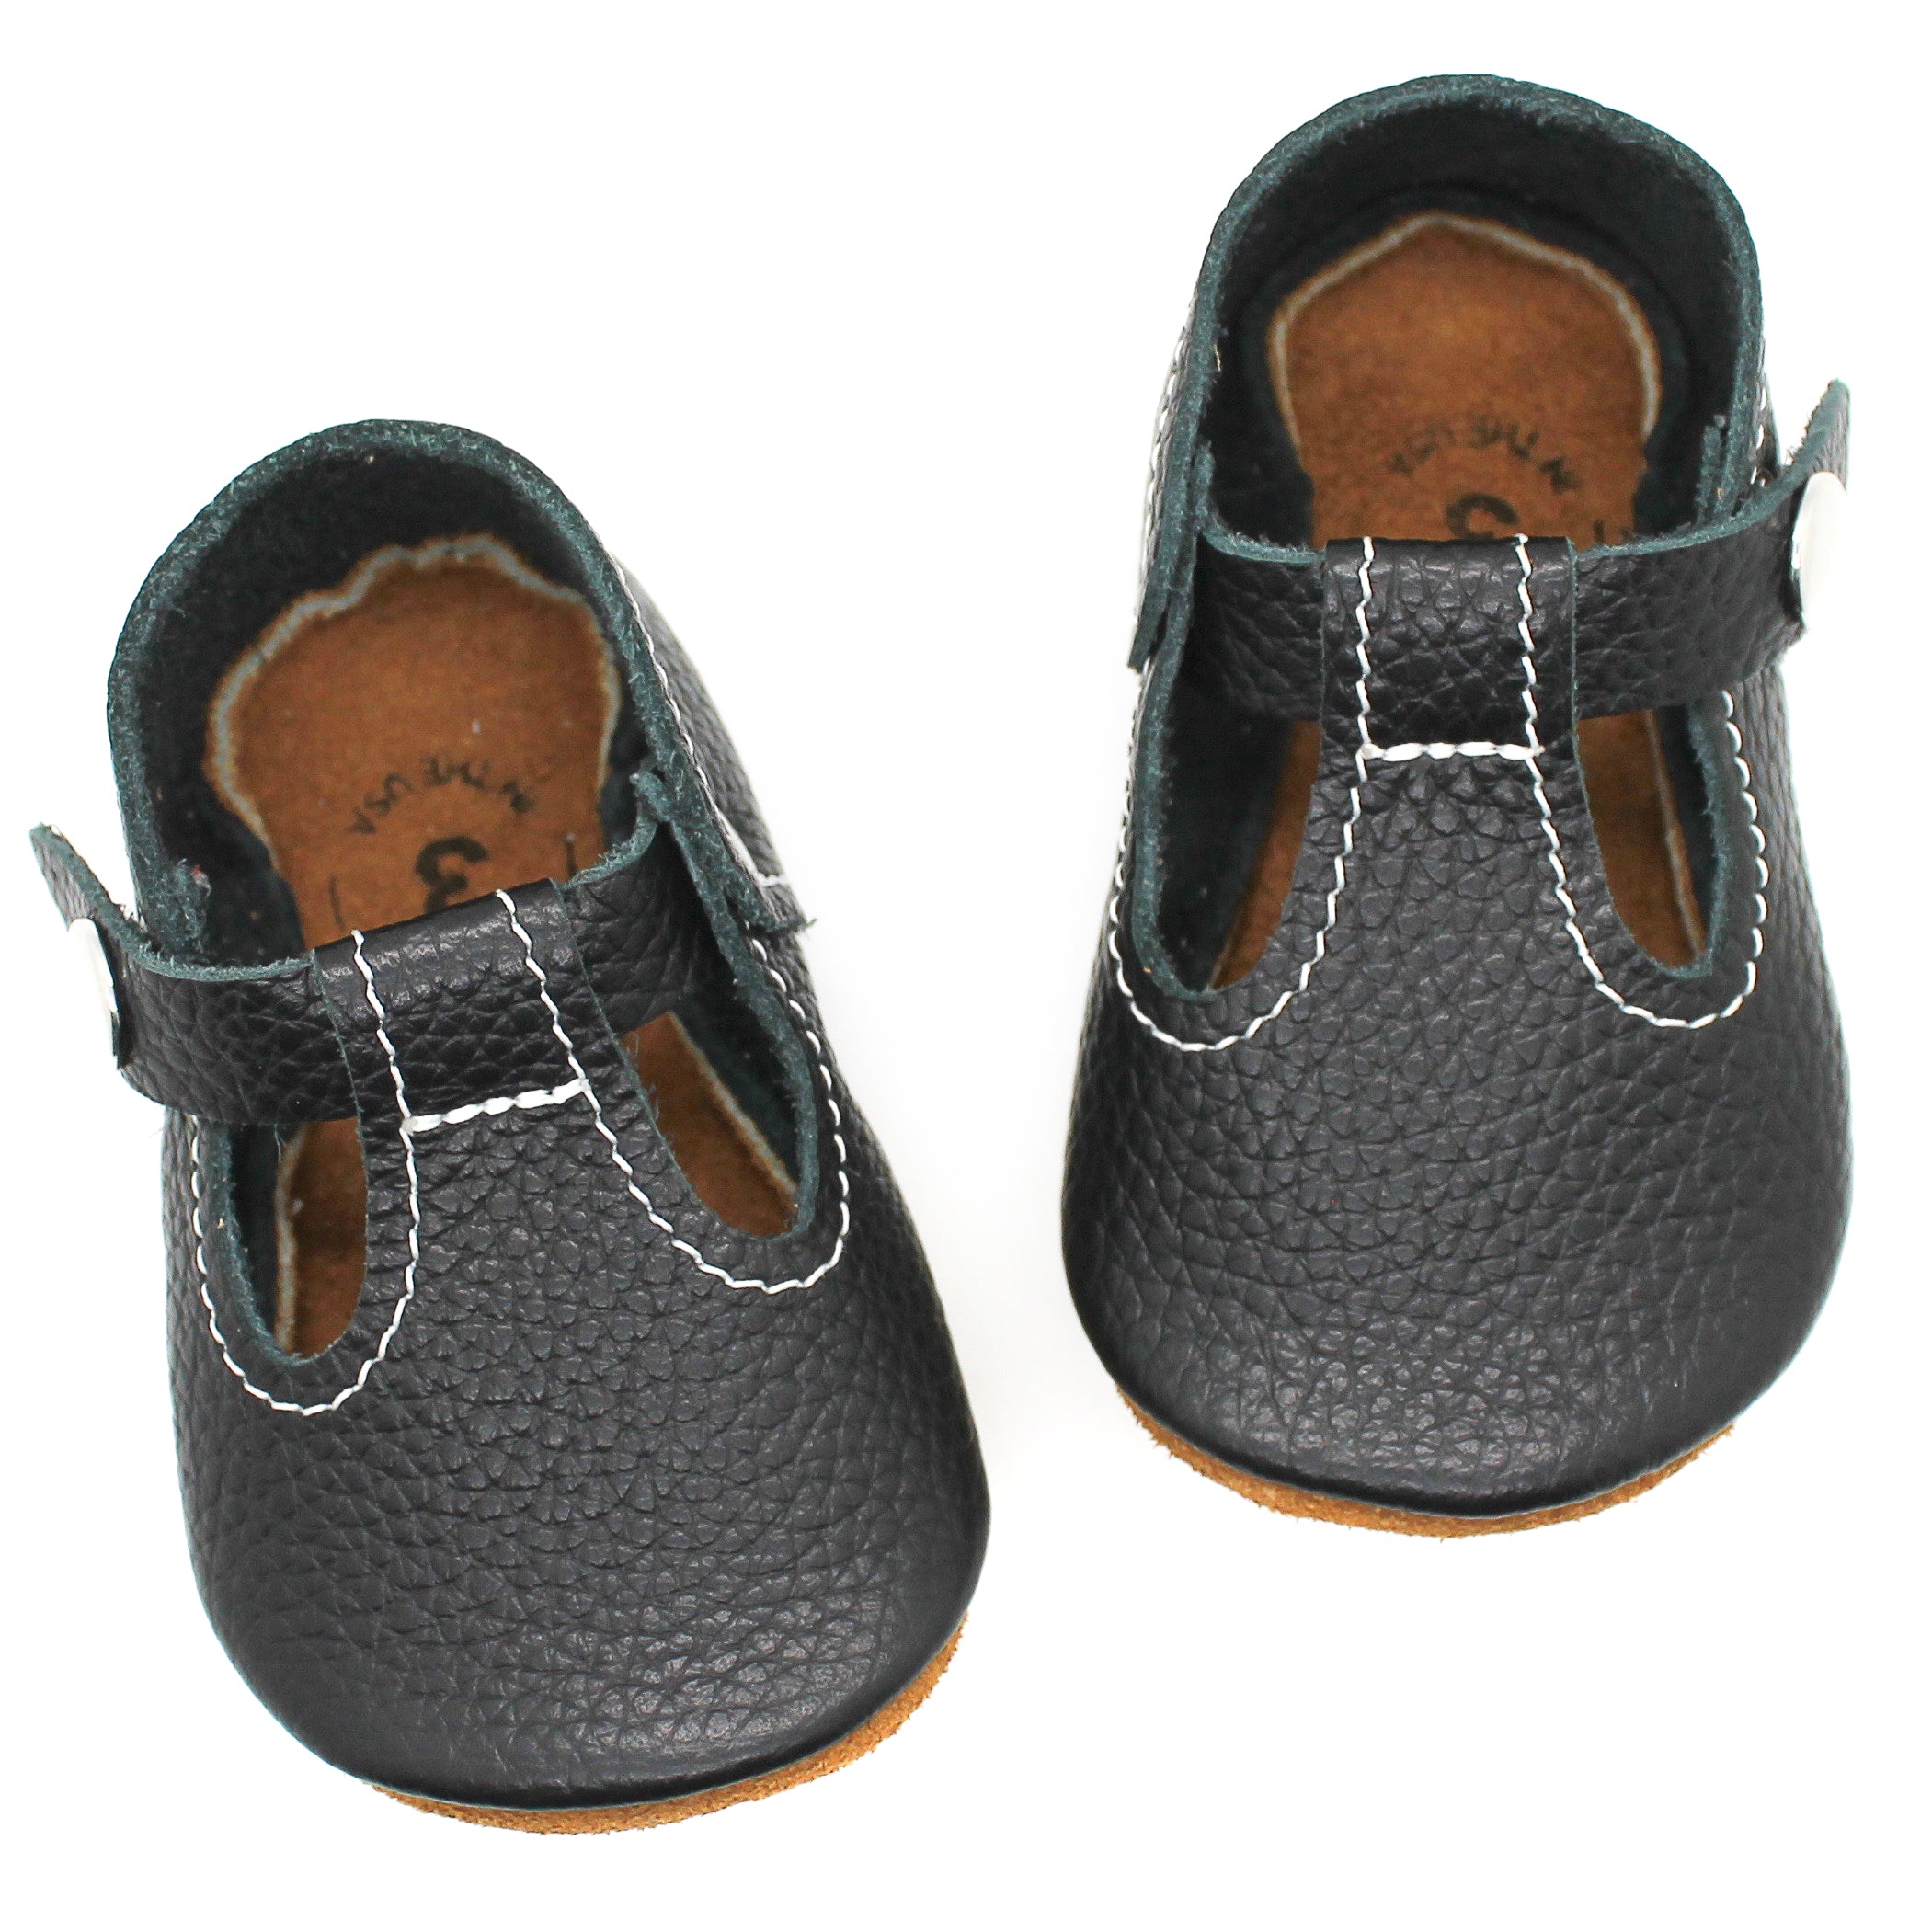 leather t strap baby shoes